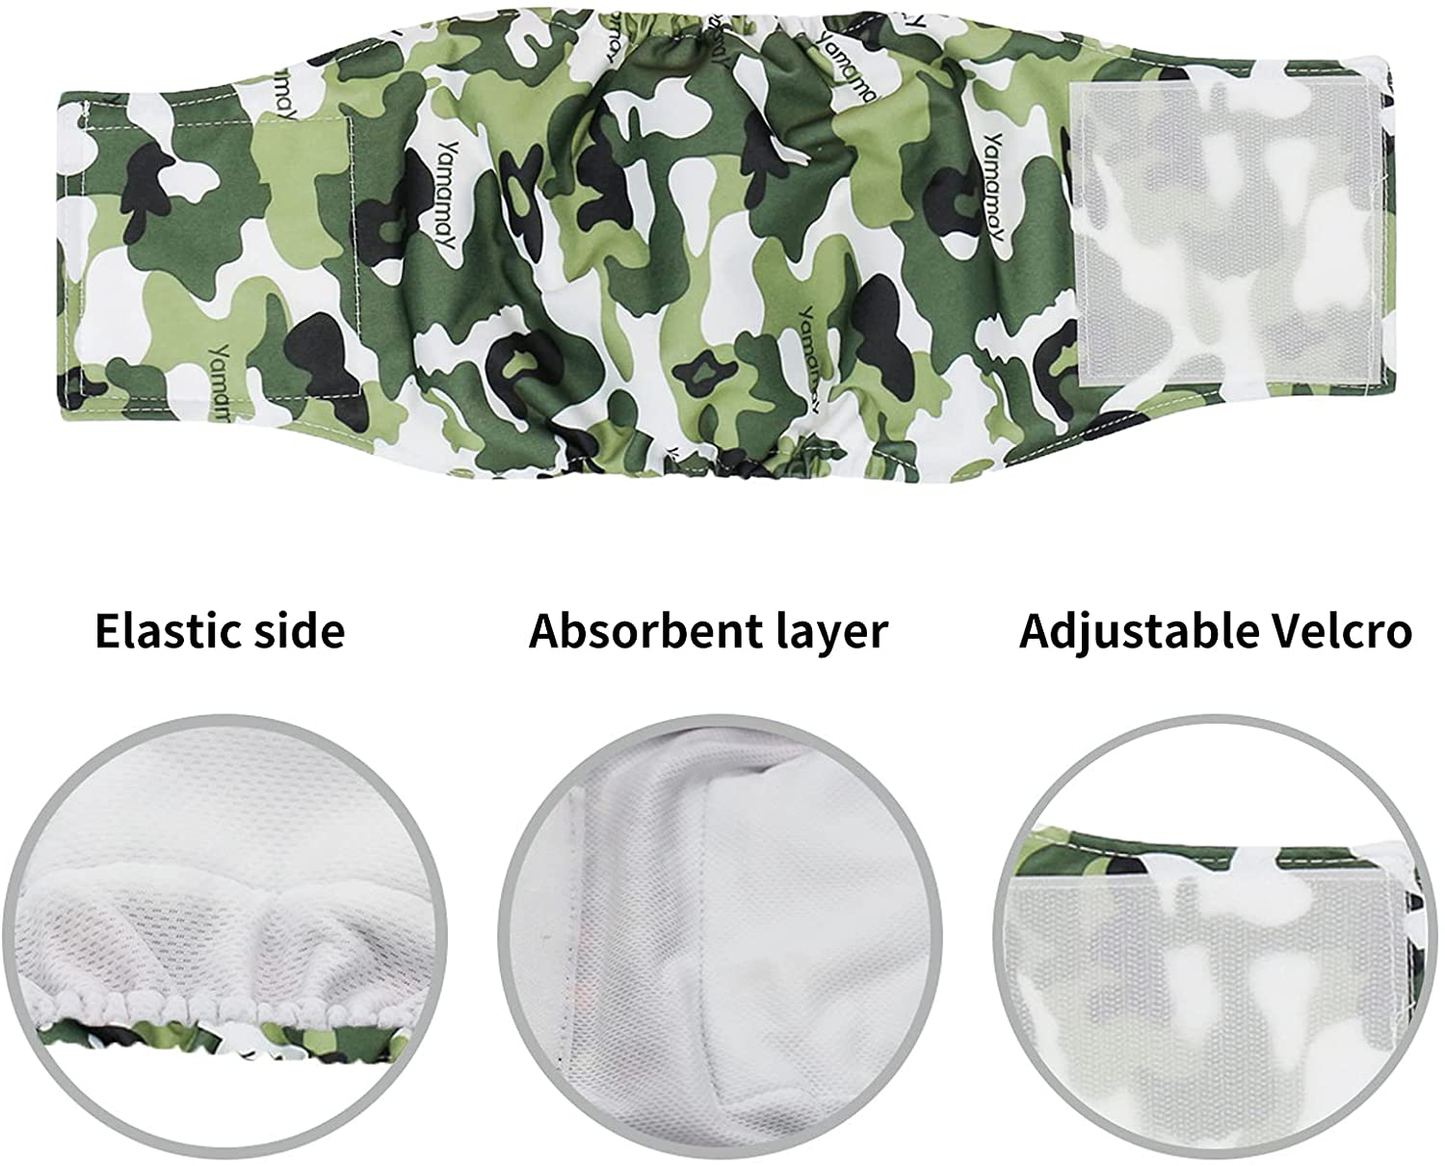 K ERATISNIK Pack of 3 Dog Sanitary Pants Super Absorbent Washable Dog Incontinence Diapers Male Dog Soft Belly Band Wraps Nappies Pants Pet Diapers for Small Medium Dogs Puppy Dog Boy Diaper